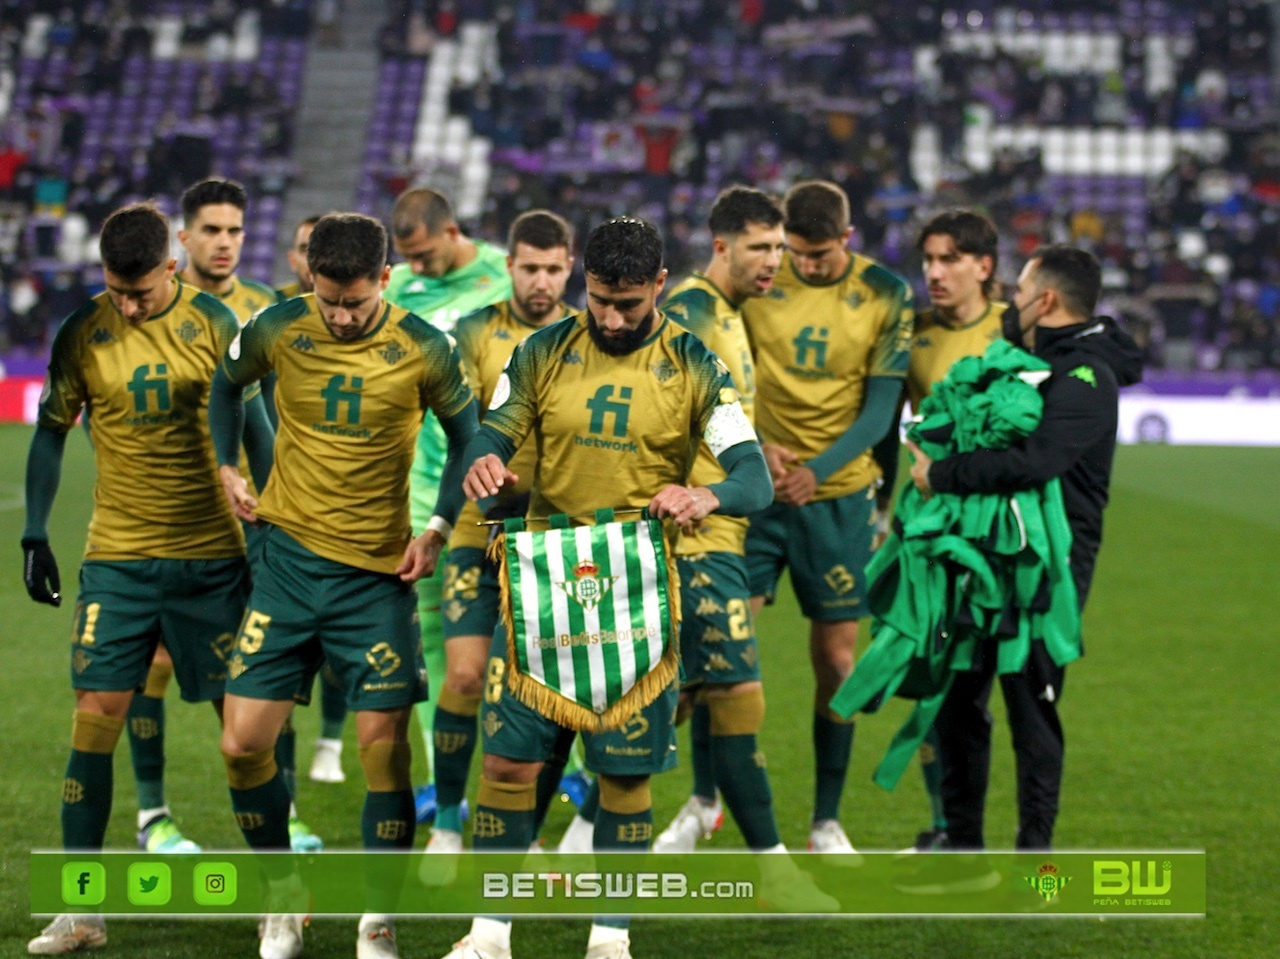 1-16-Real-Valladolid-vs-Real-Betis149